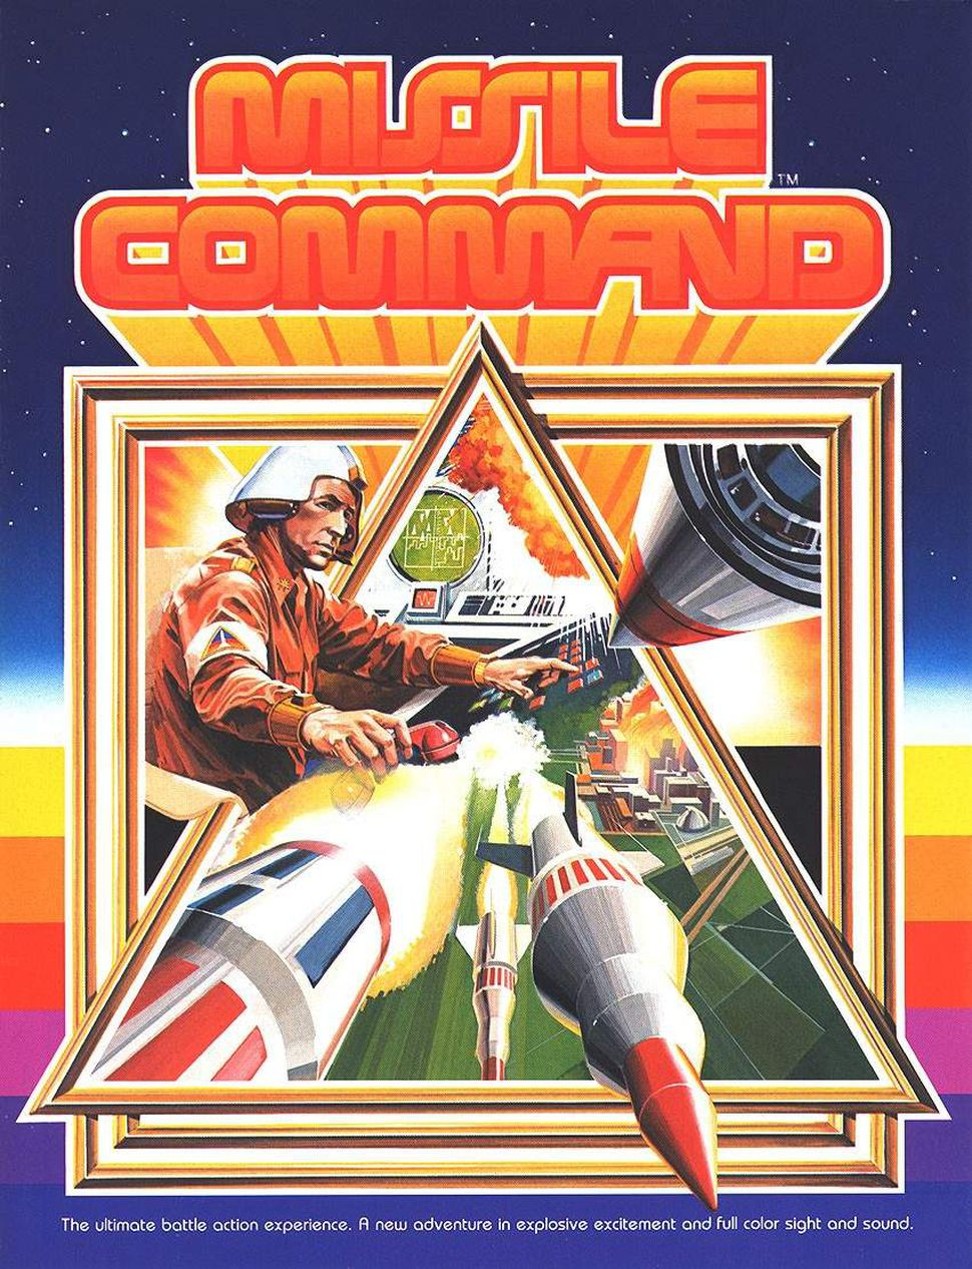 A poster for Missile Command.